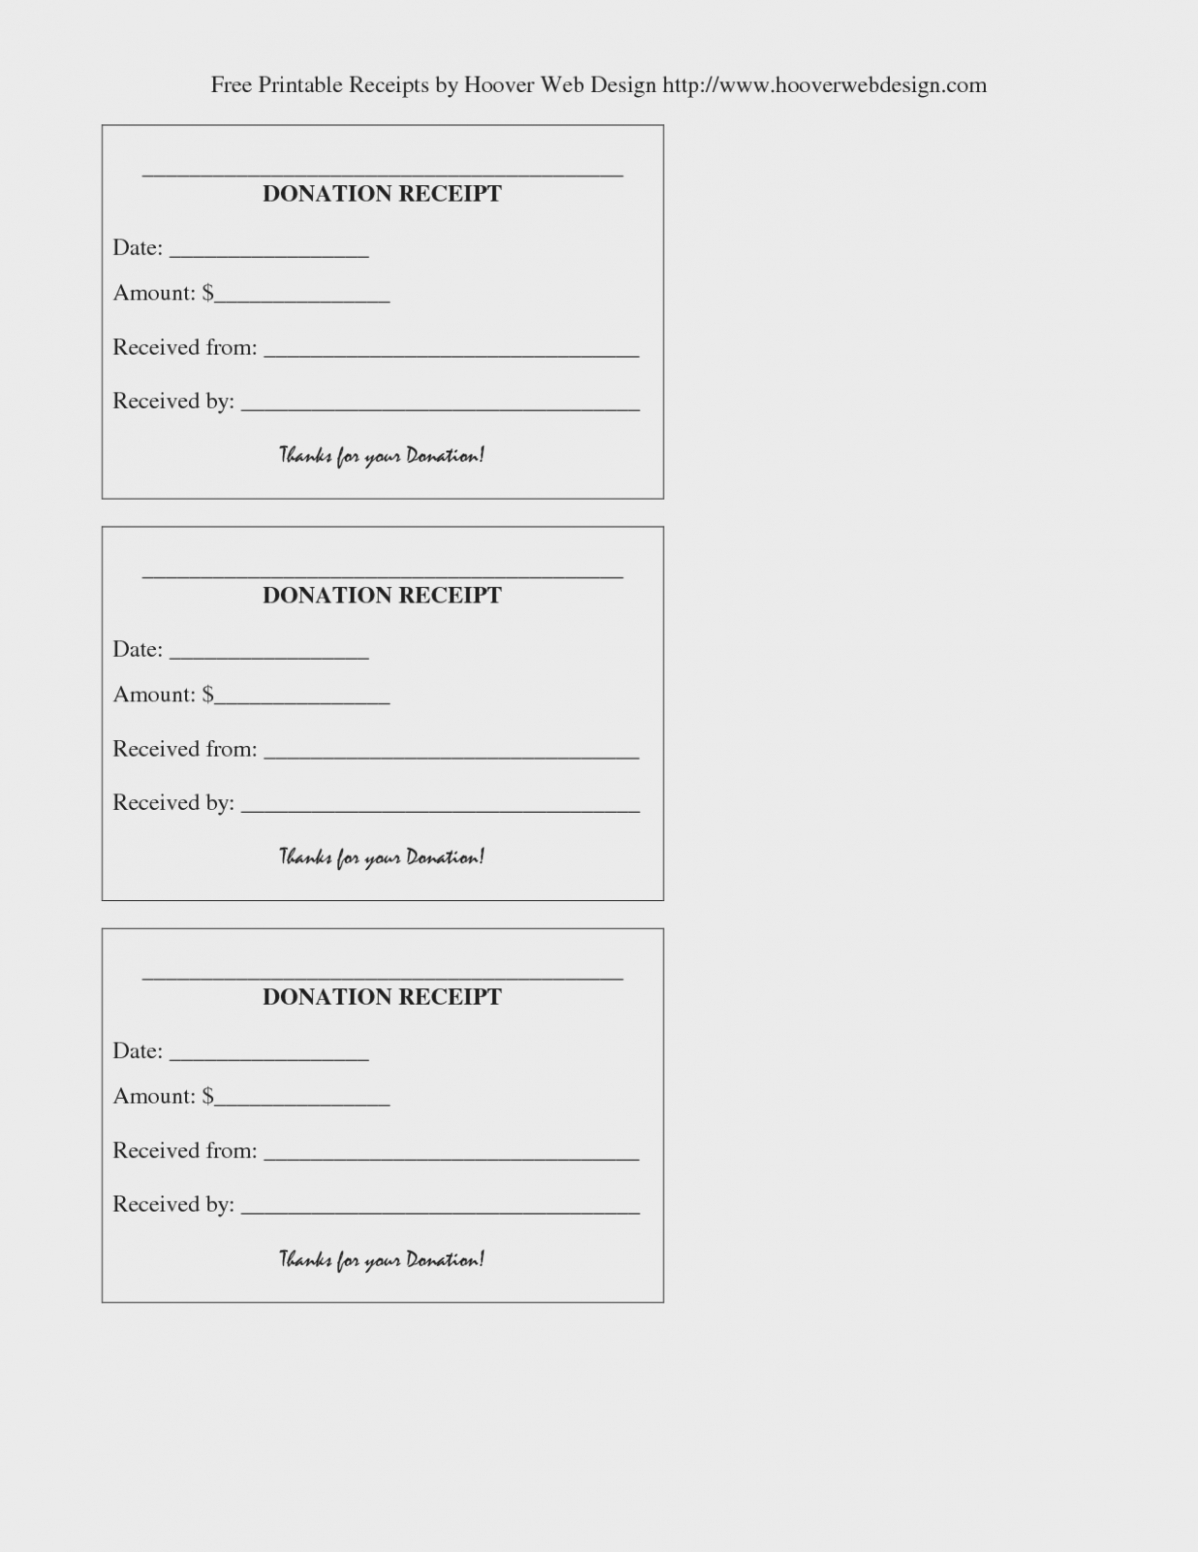 How Blank Receipt Form | Realty Executives Mi : Invoice And Resume - Free Printable Receipts